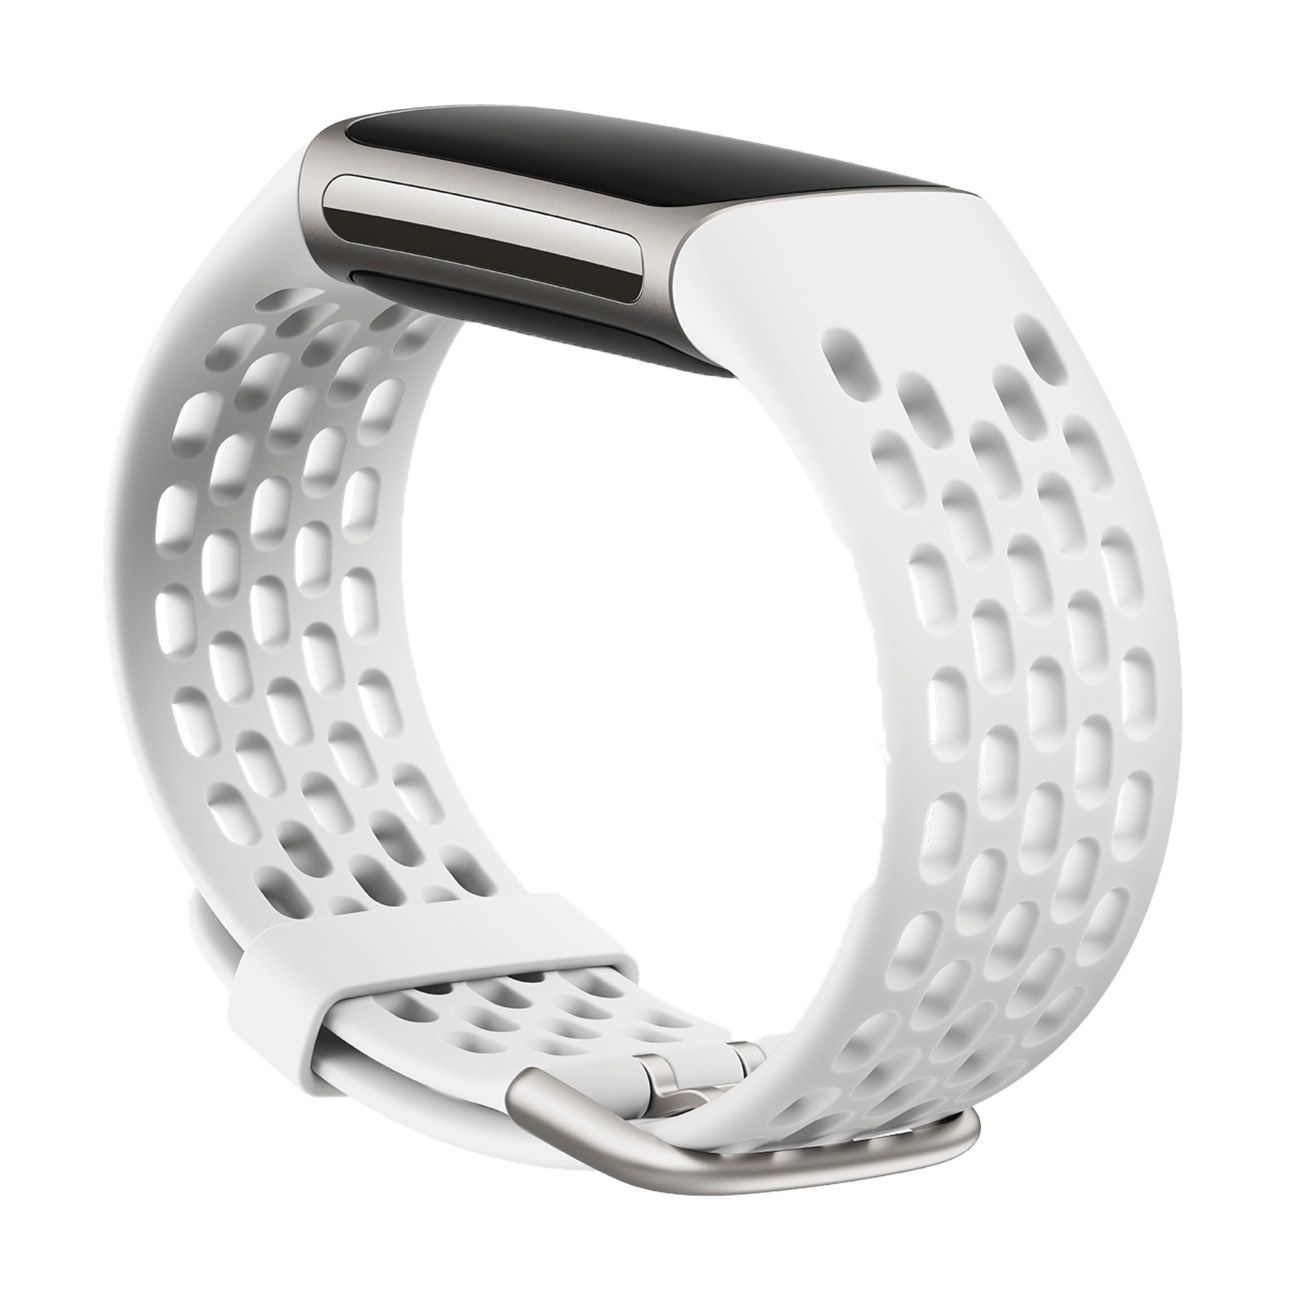 5 FITBIT weiß 5, Sport, Ersatzarmband, Charge Charge Fitbit,